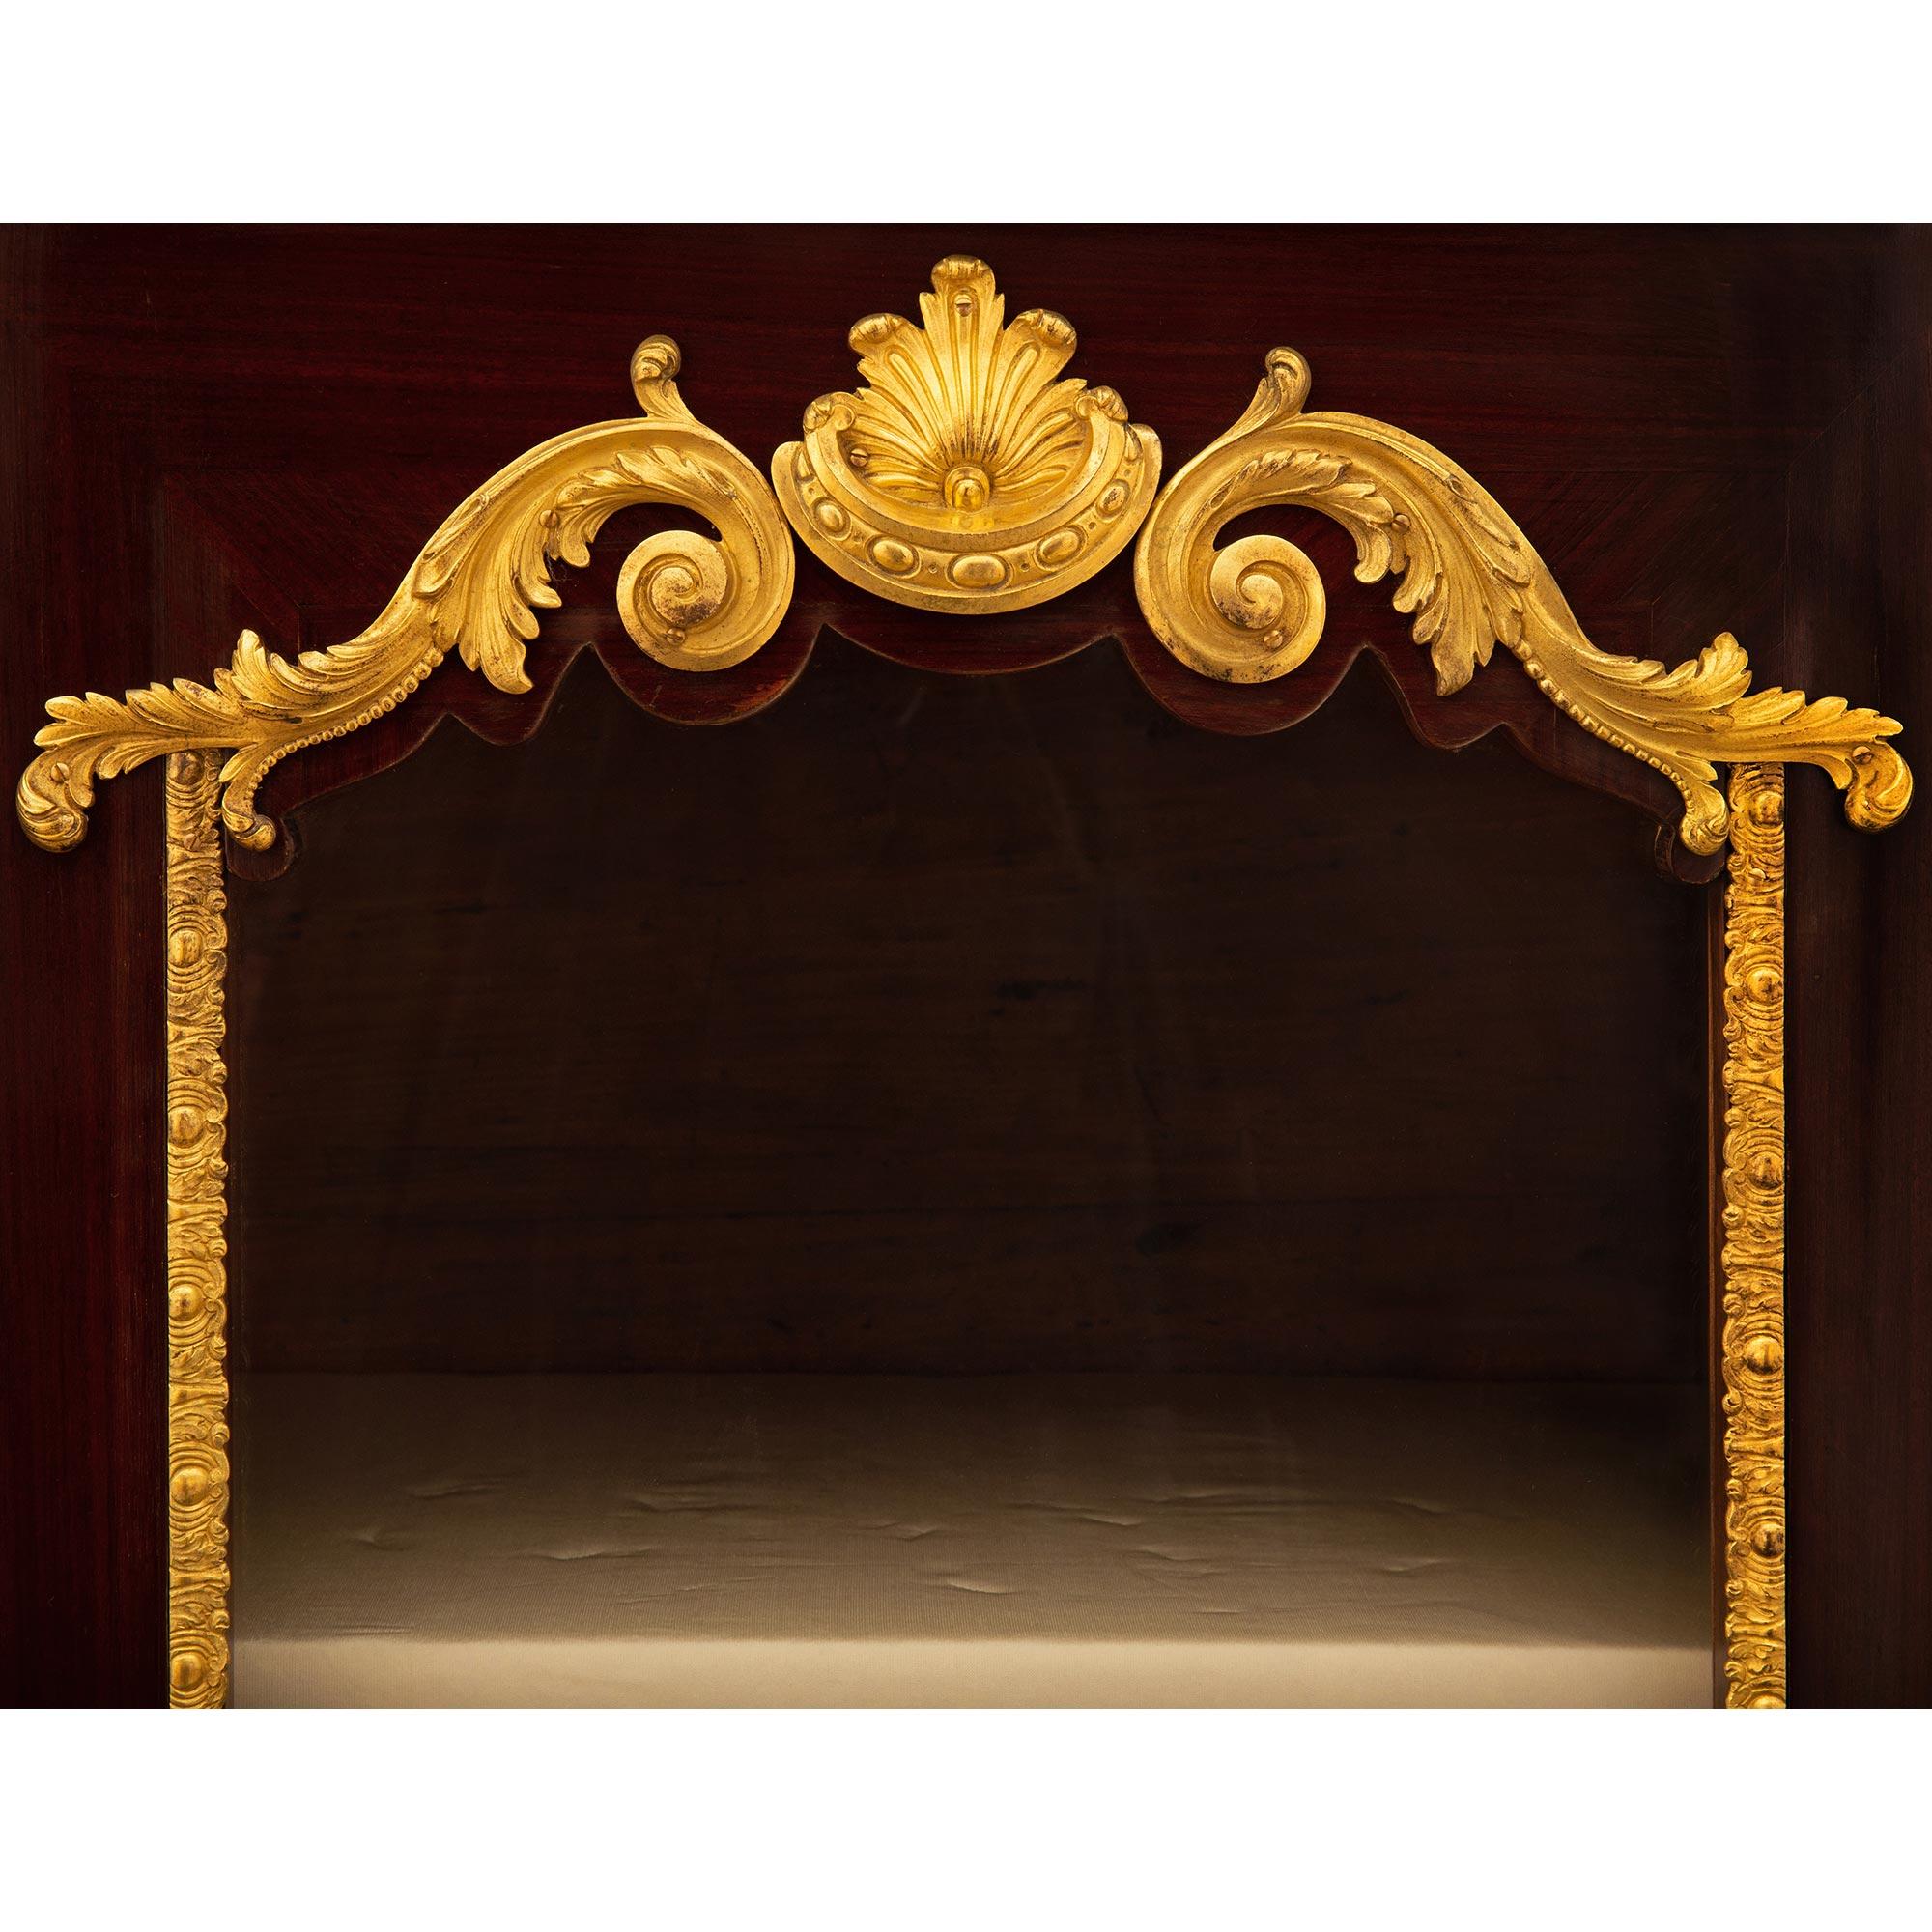 French 18th Century Regence Period Kingwood, Ormolu, and Brass Cabinet Vitrine For Sale 2